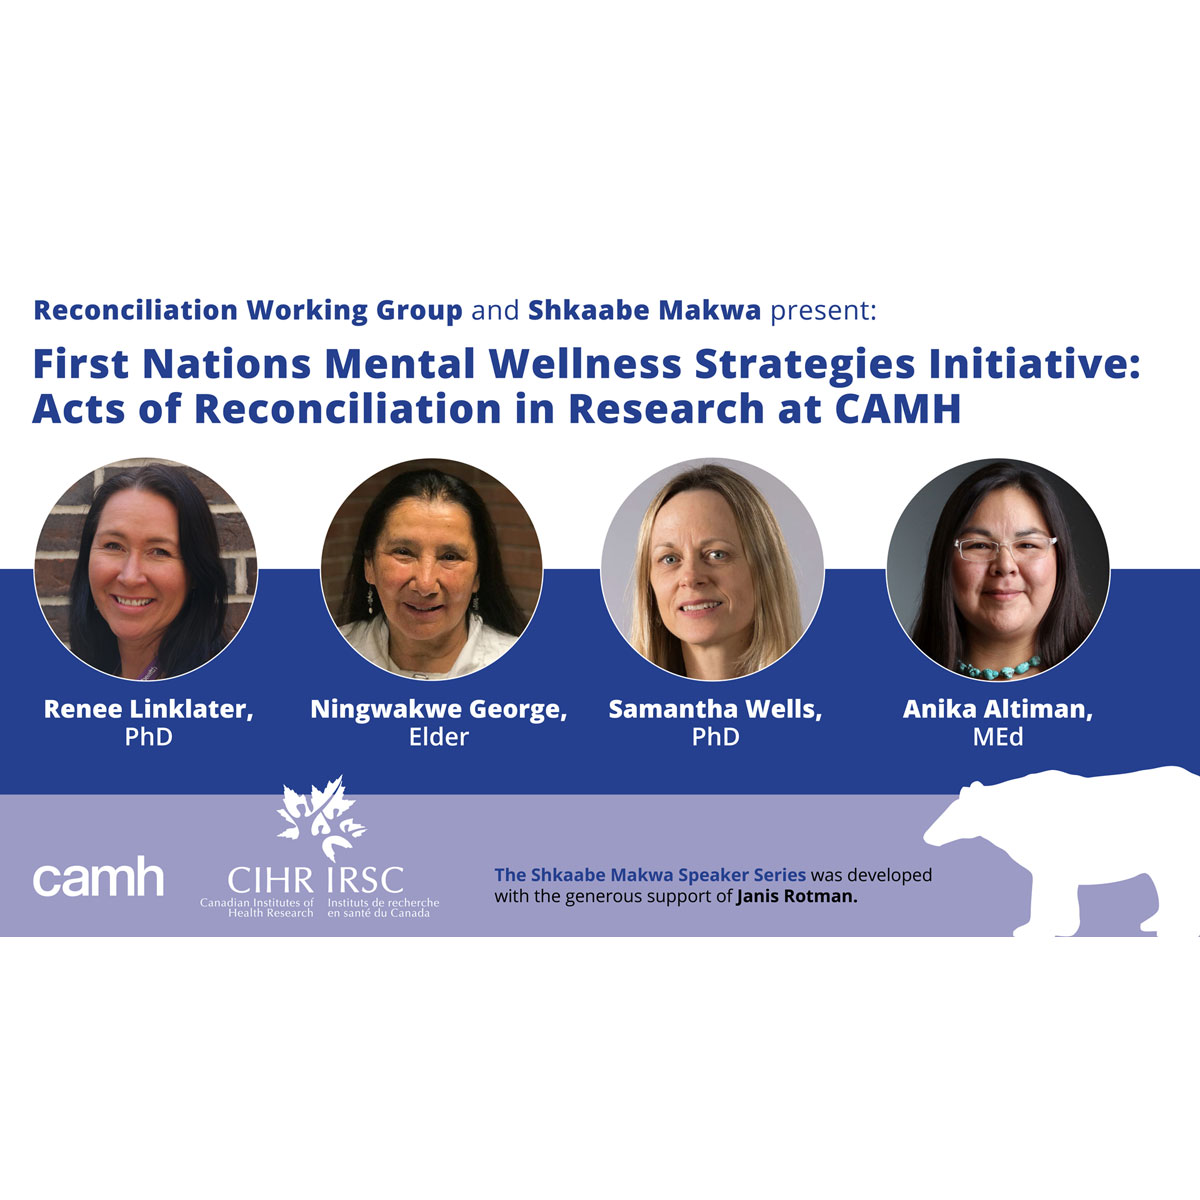 First Nations Mental Wellness Strategies Initiative: Acts of Reconciliation in Research at CAMH